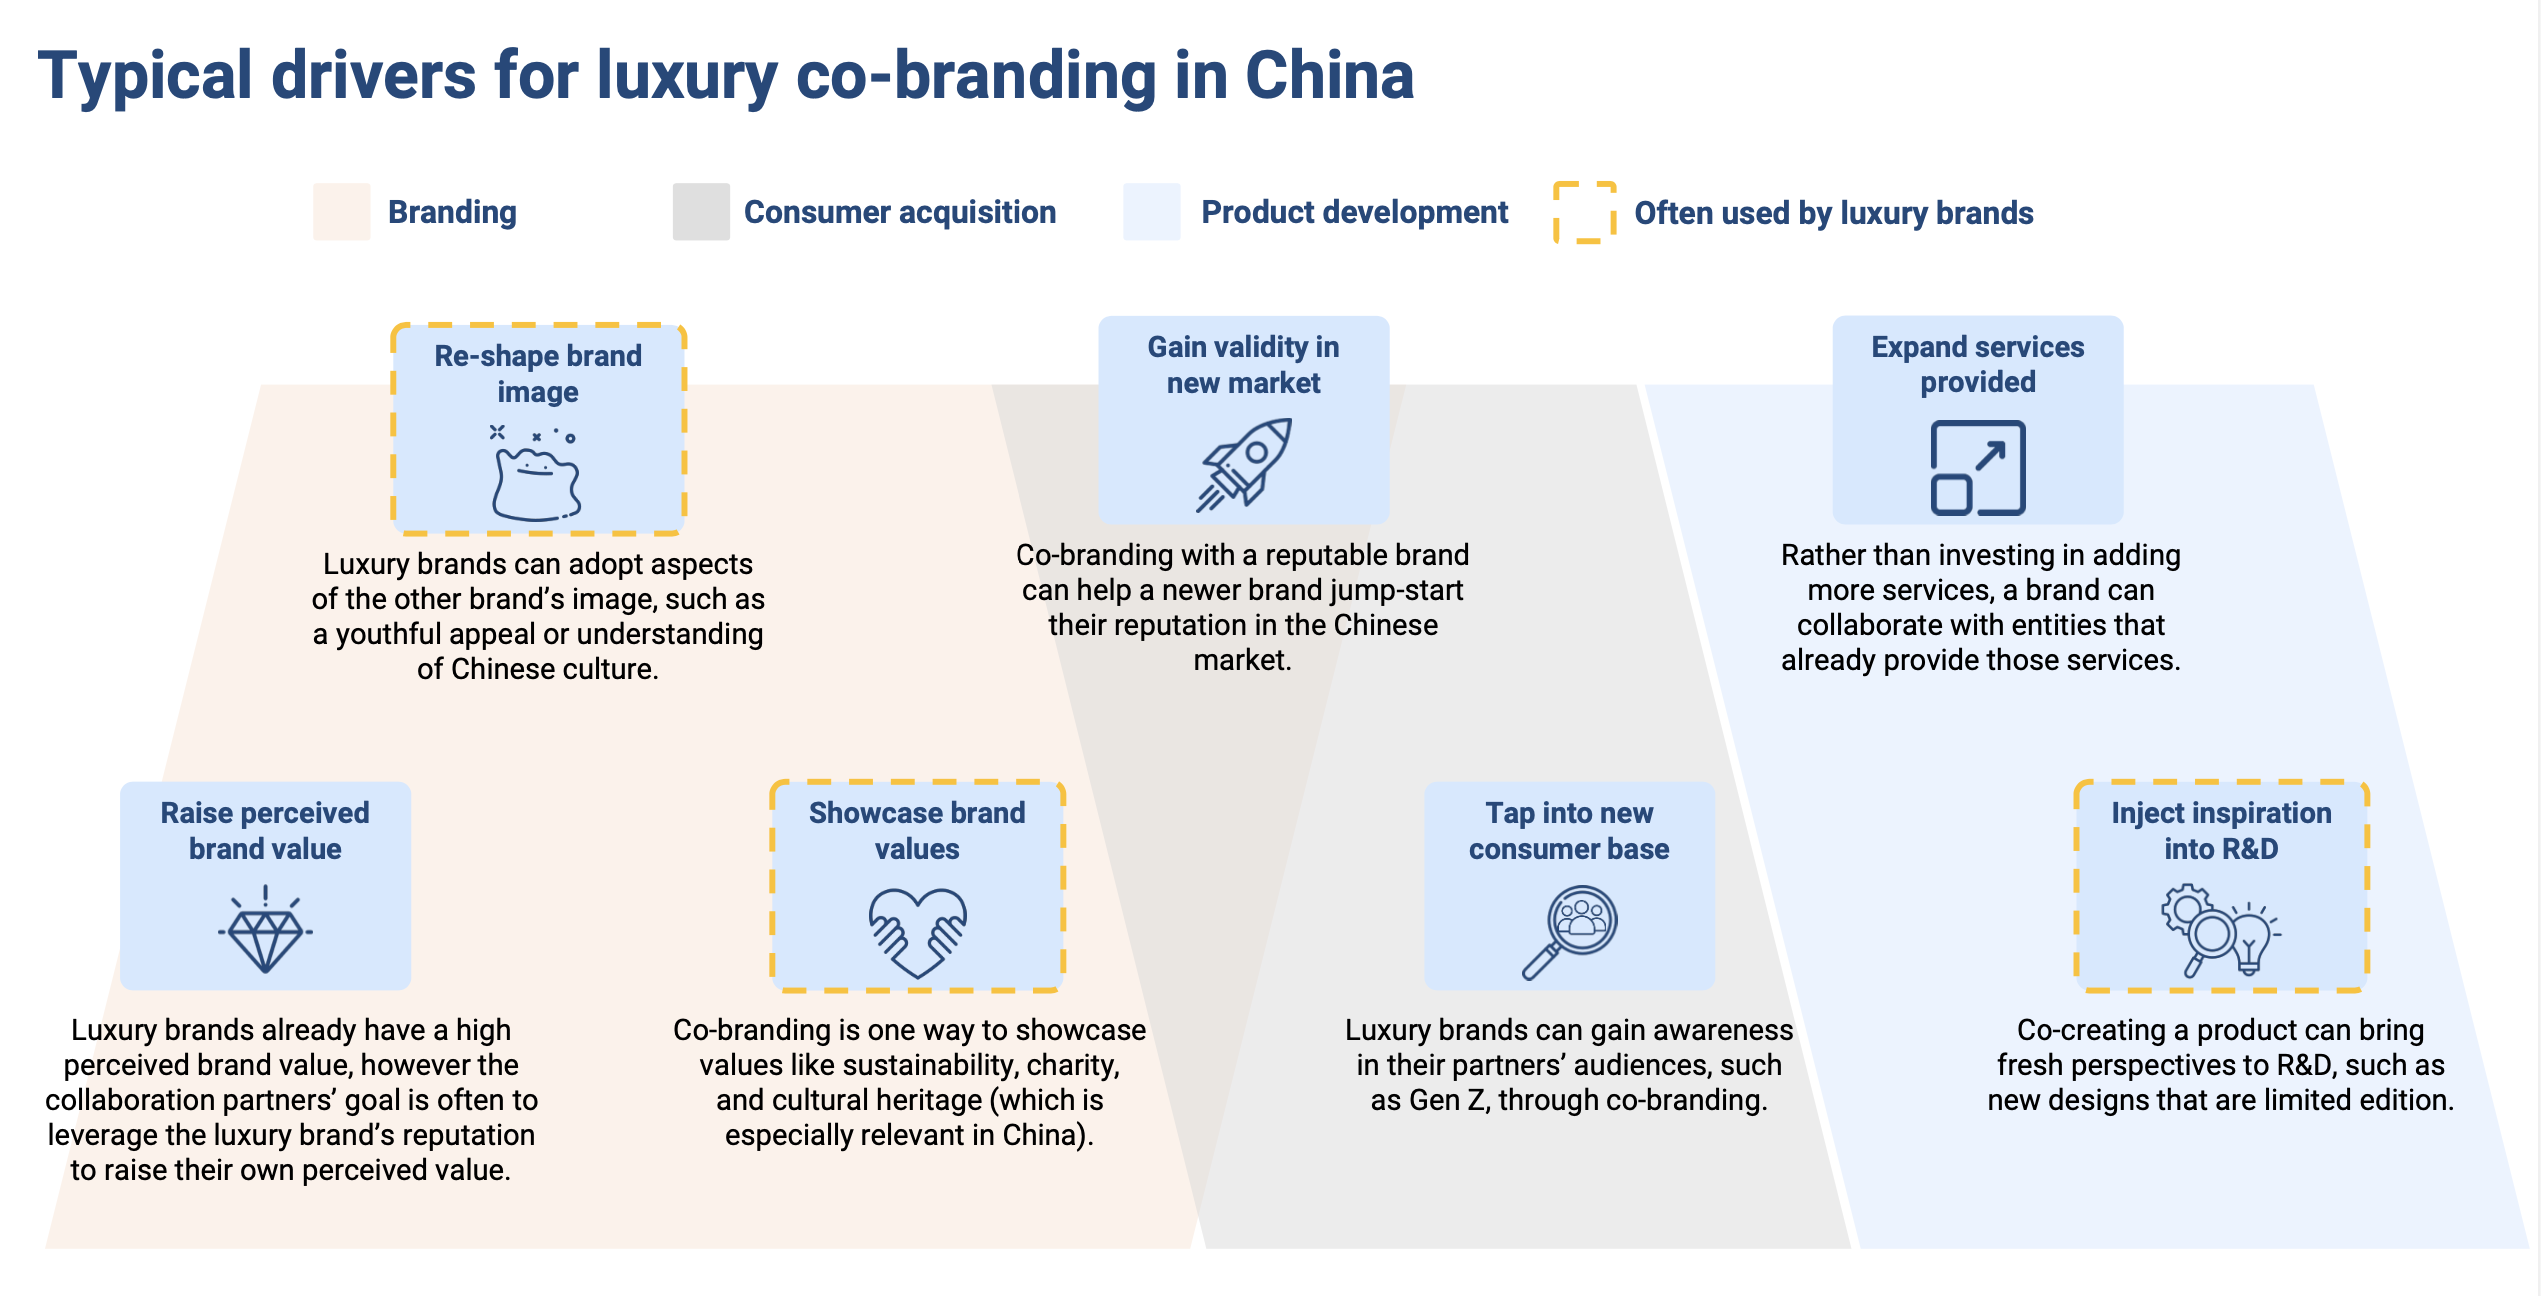 Co-branding in China: Reasons for engaging in co-branding collaborations